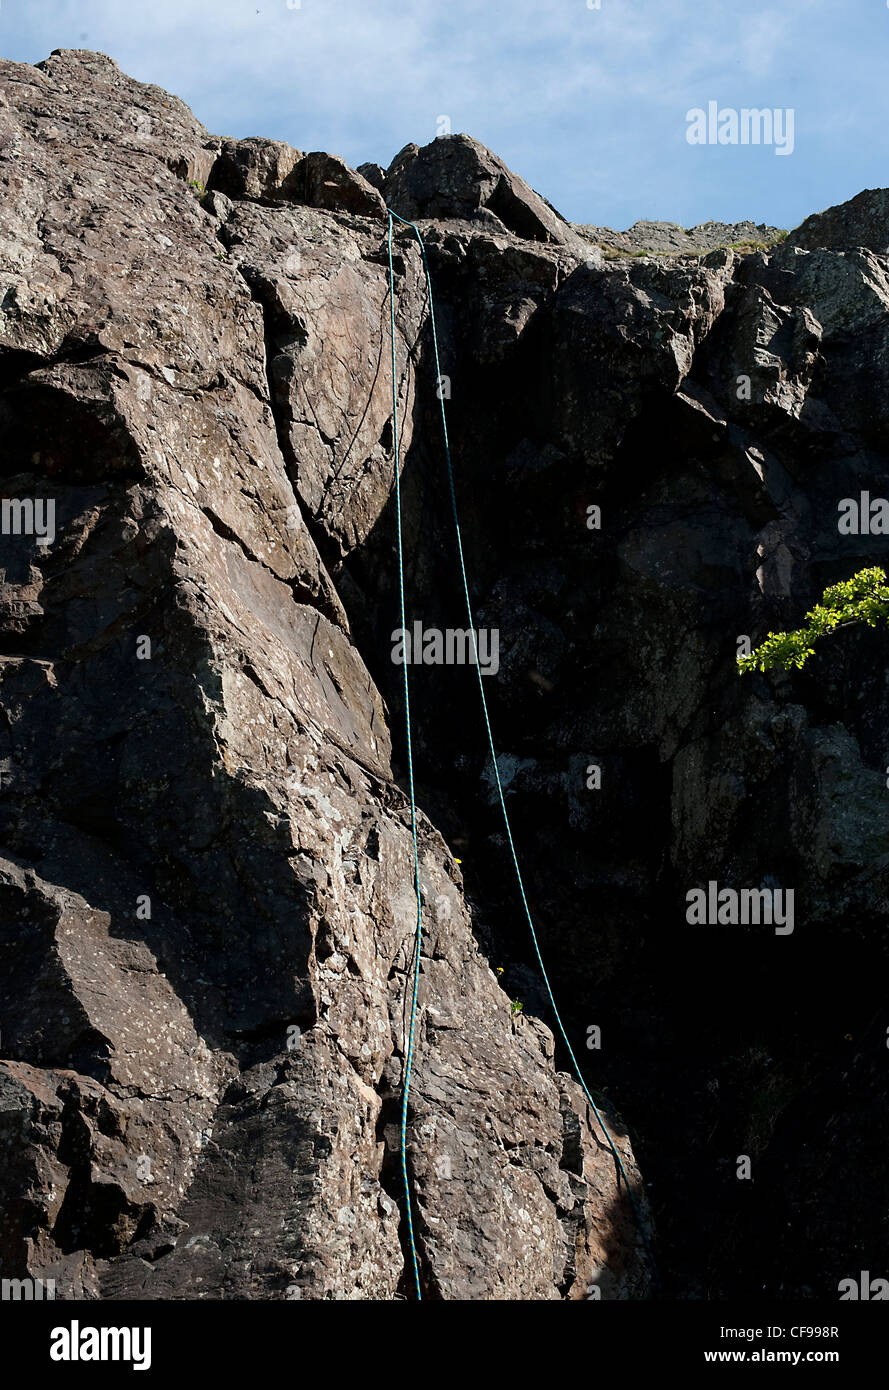 A climbers top rope hangs down a dolerite rock cliff in the sun at Auchinstarry Quarry, Scotland Stock Photo